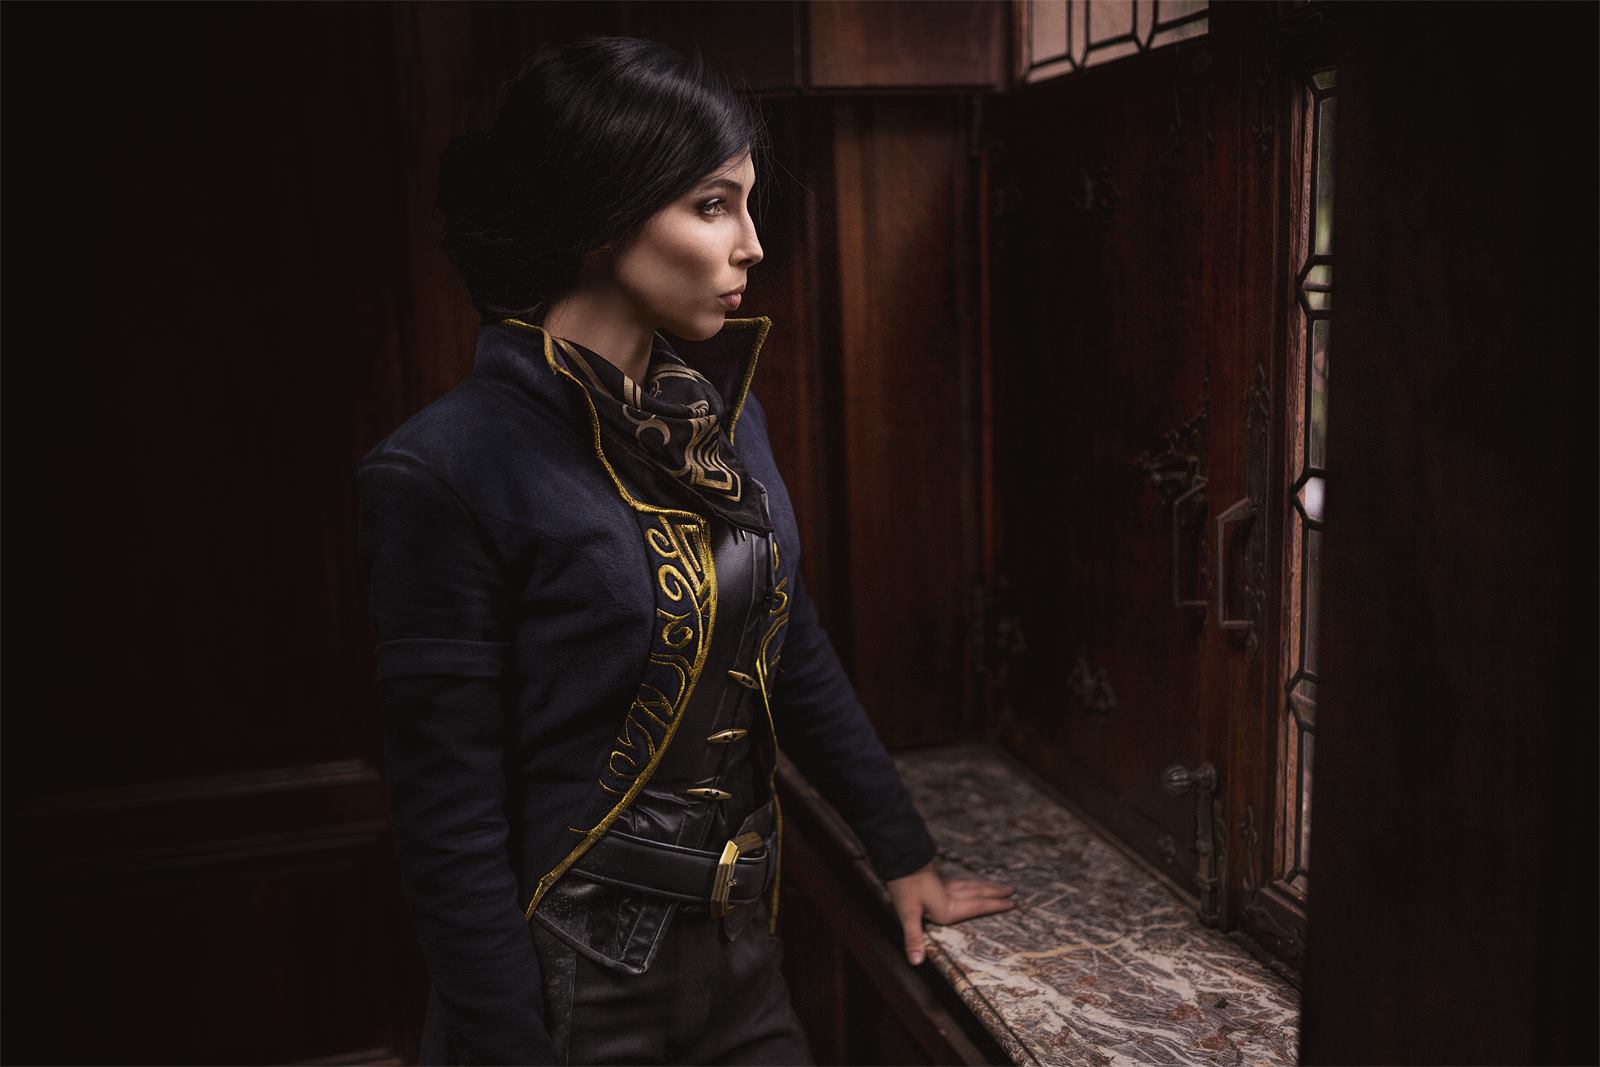 Some Terrific Dishonored 2 Cosplay